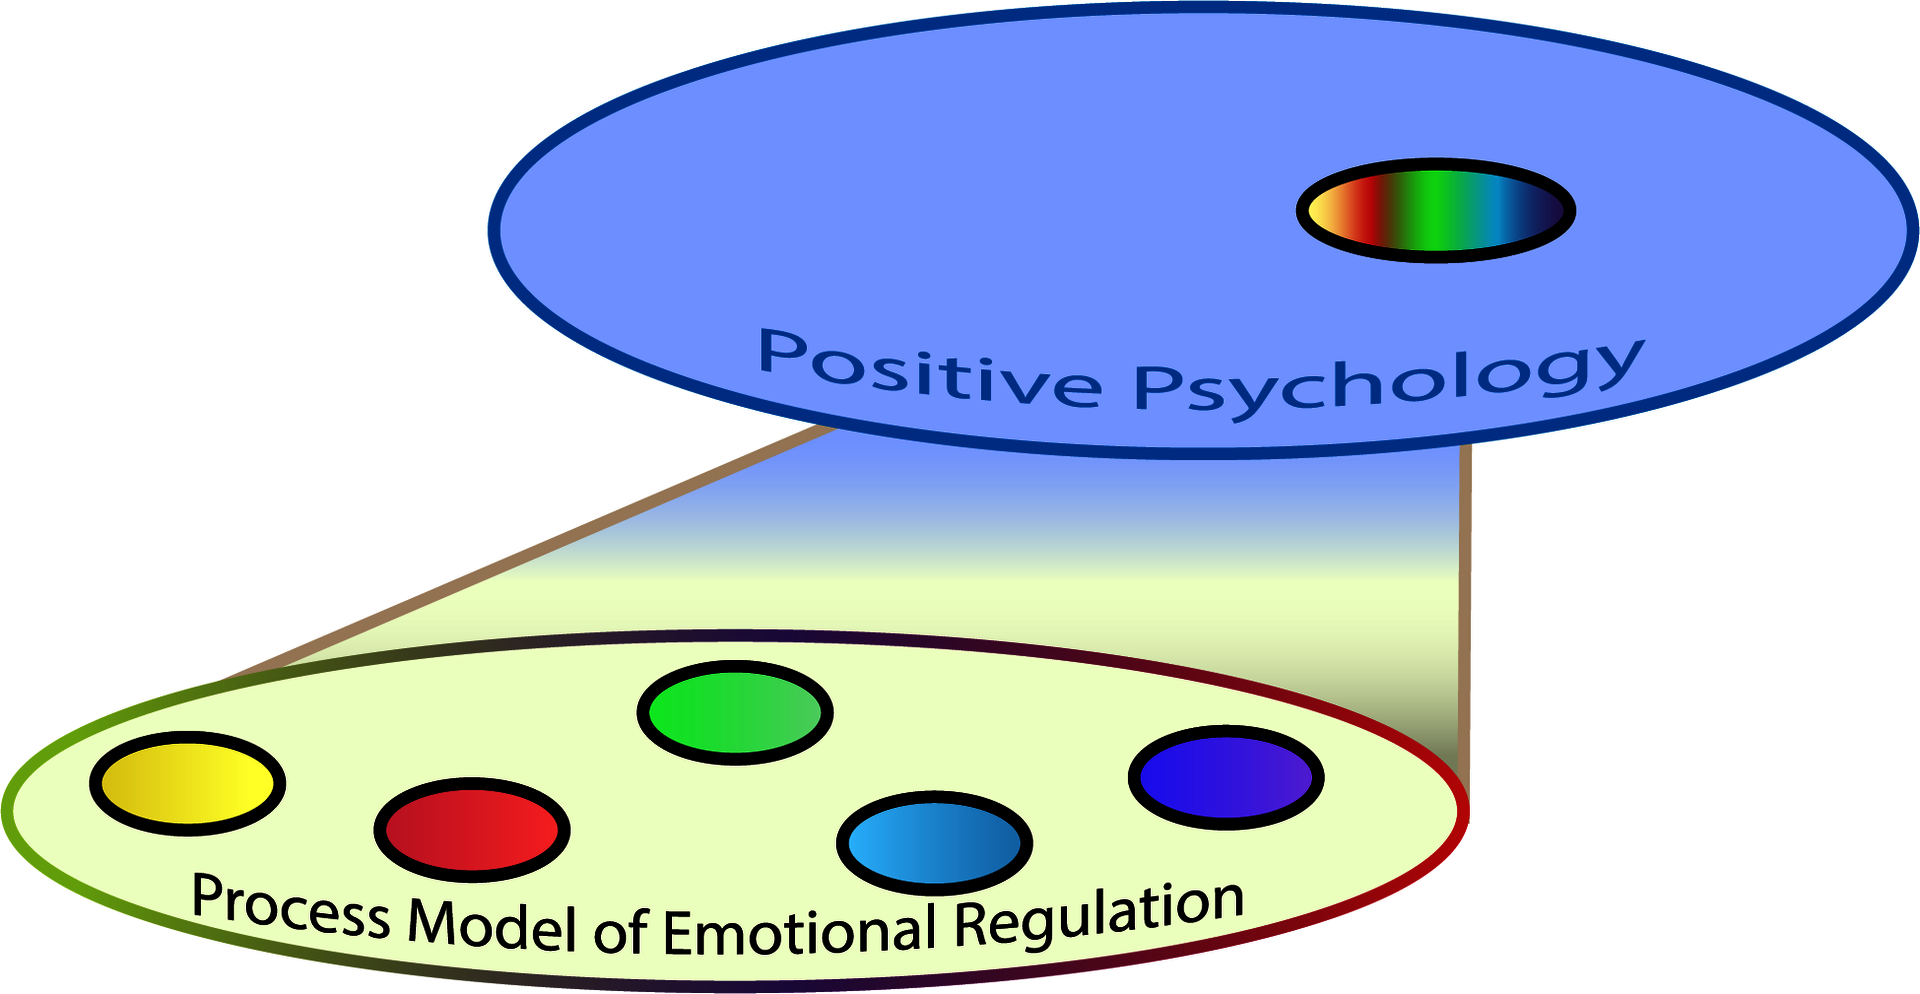 portion of the main visual diagram of the investigation: showing the highest layer of "positive psychology" and the subsection of "emotional regulation" below.